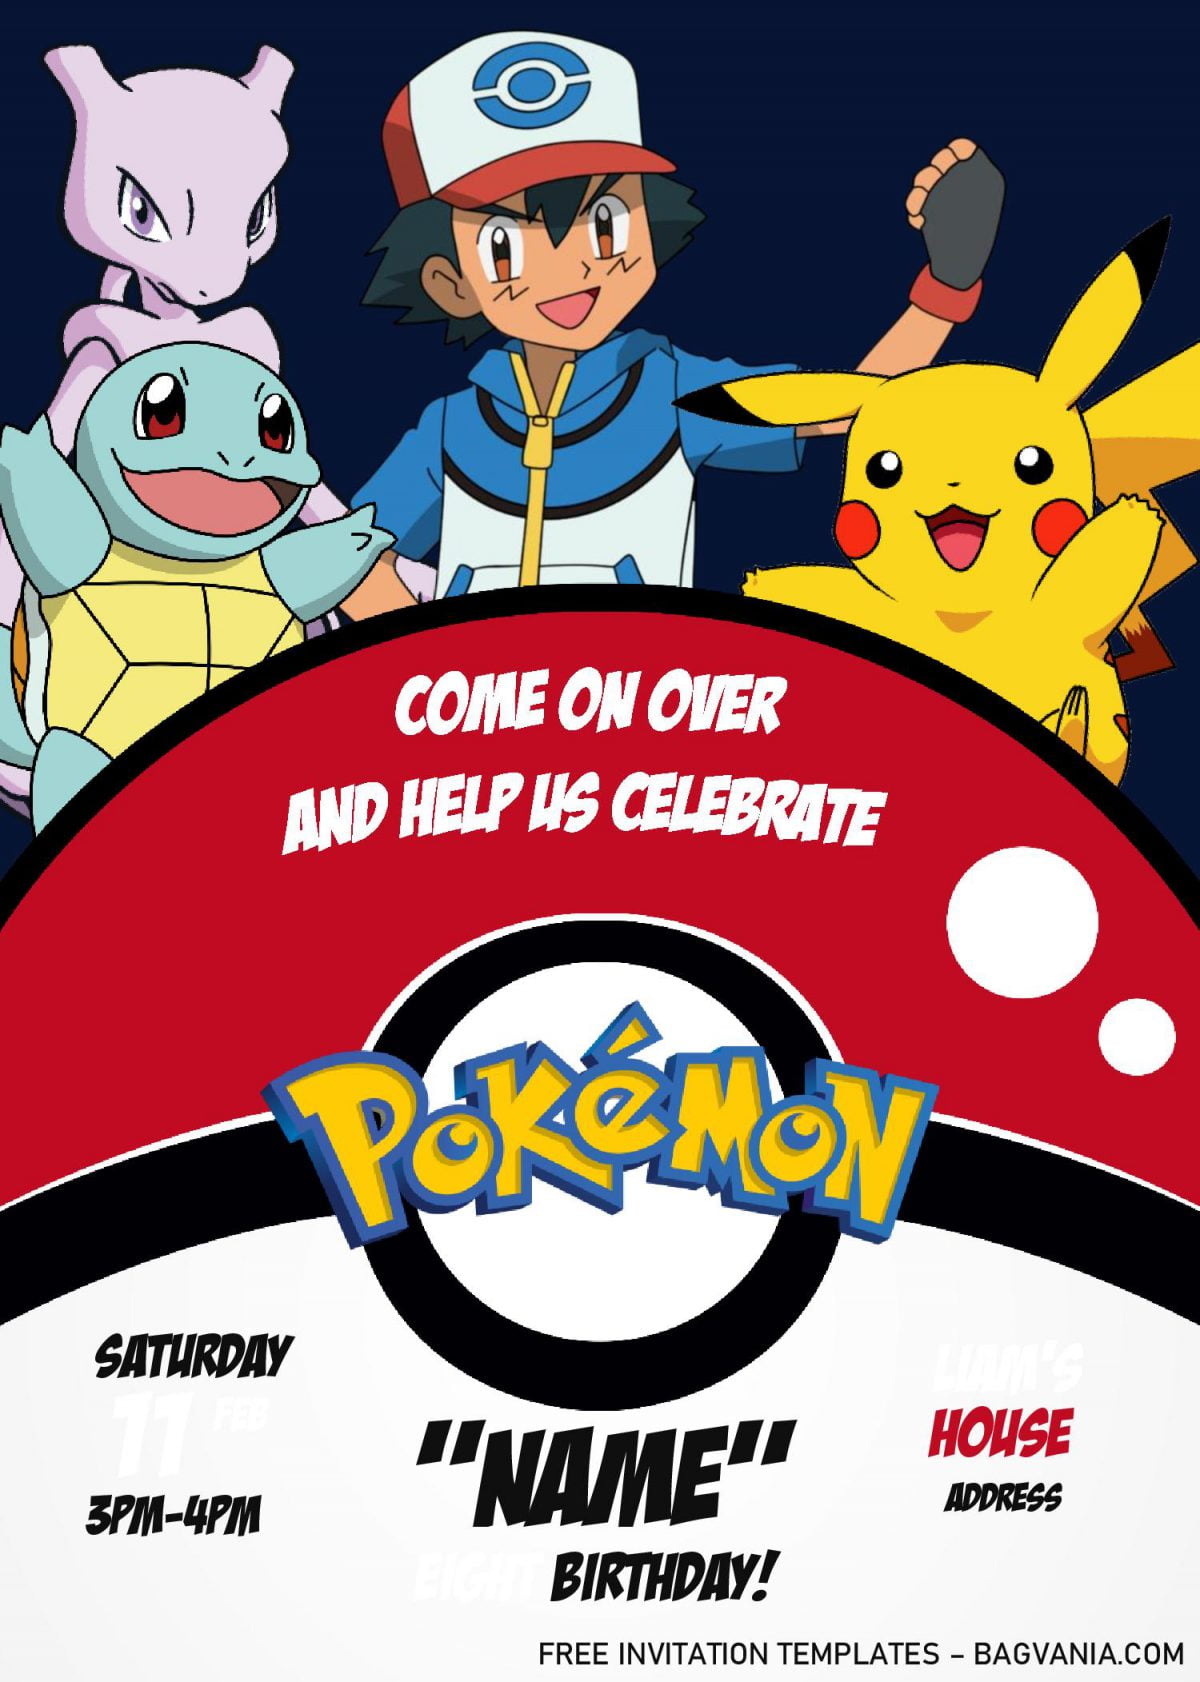 Pokemon Invitation Templates - Editable With MS Word and has squirtle